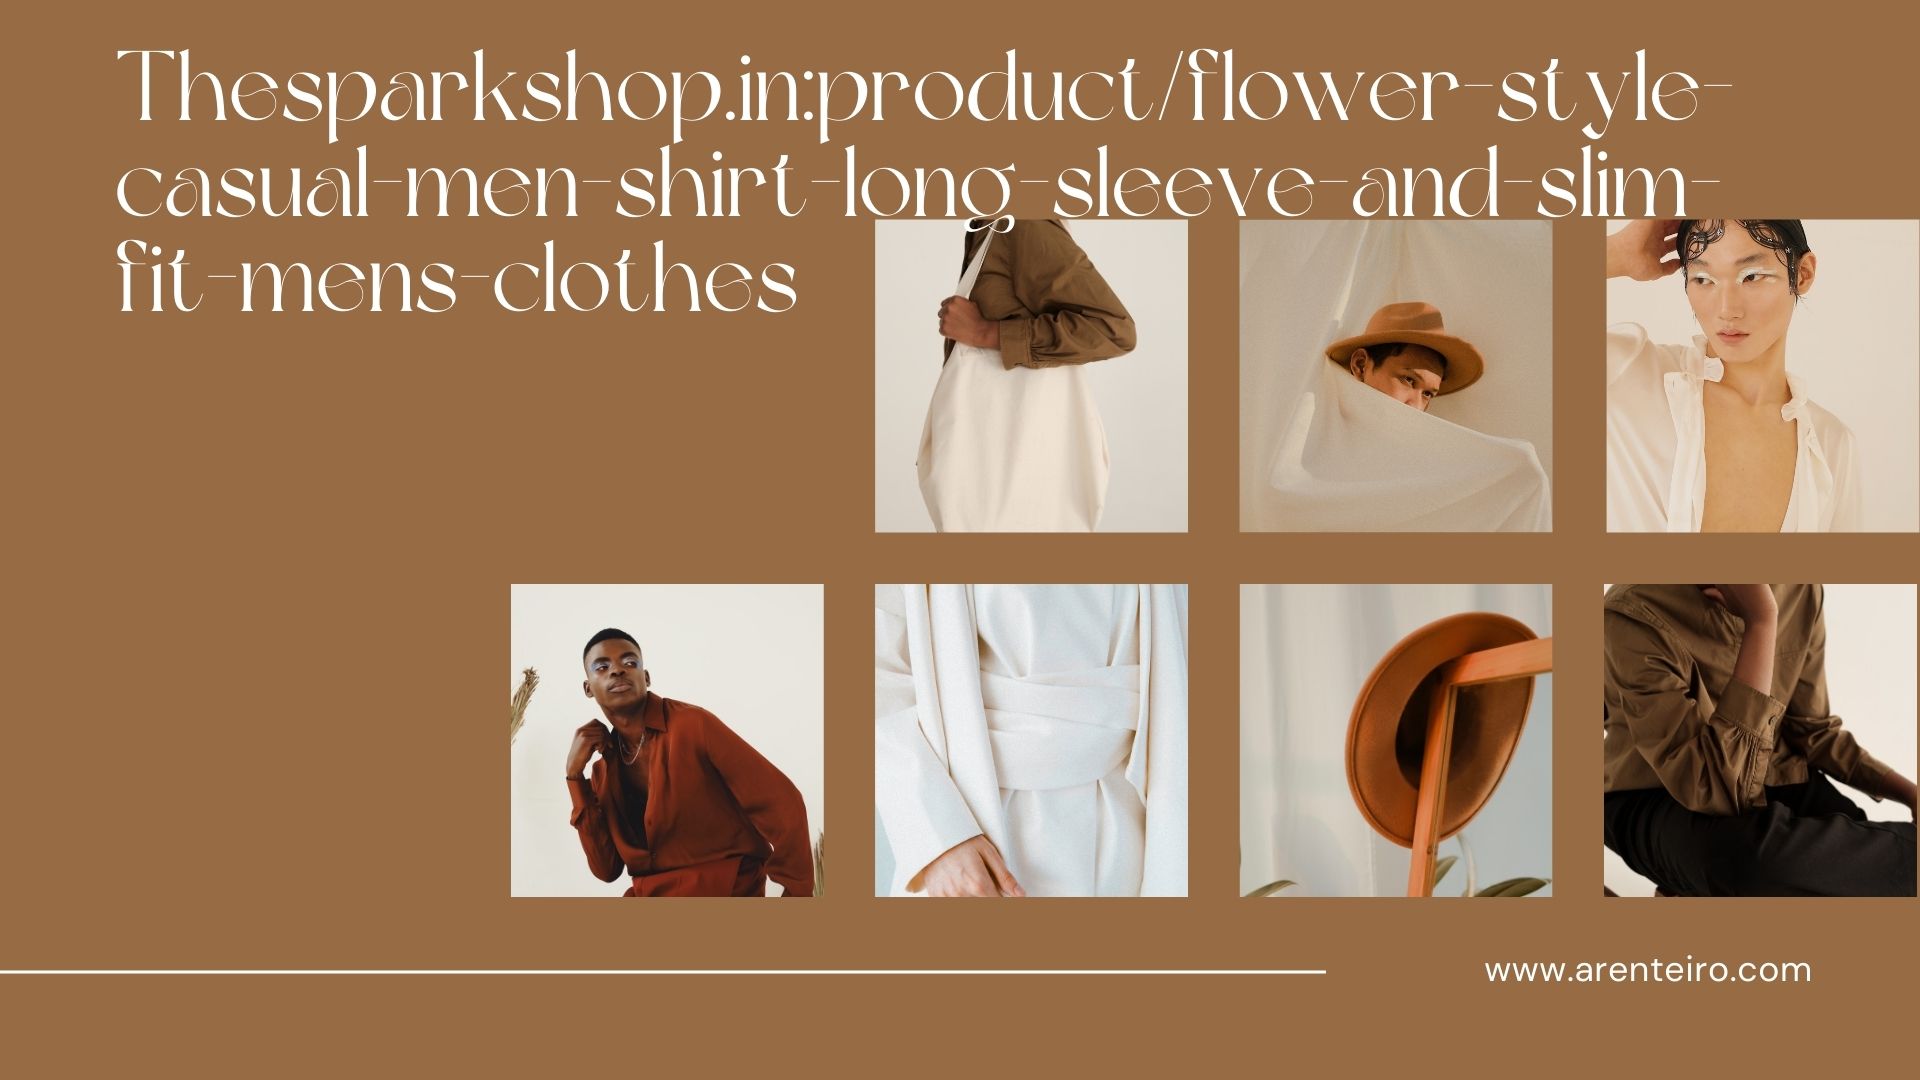 Thesparkshop.in:product/flower-style-casual-men-shirt-long-sleeve-and-slim-fit-mens-clothes